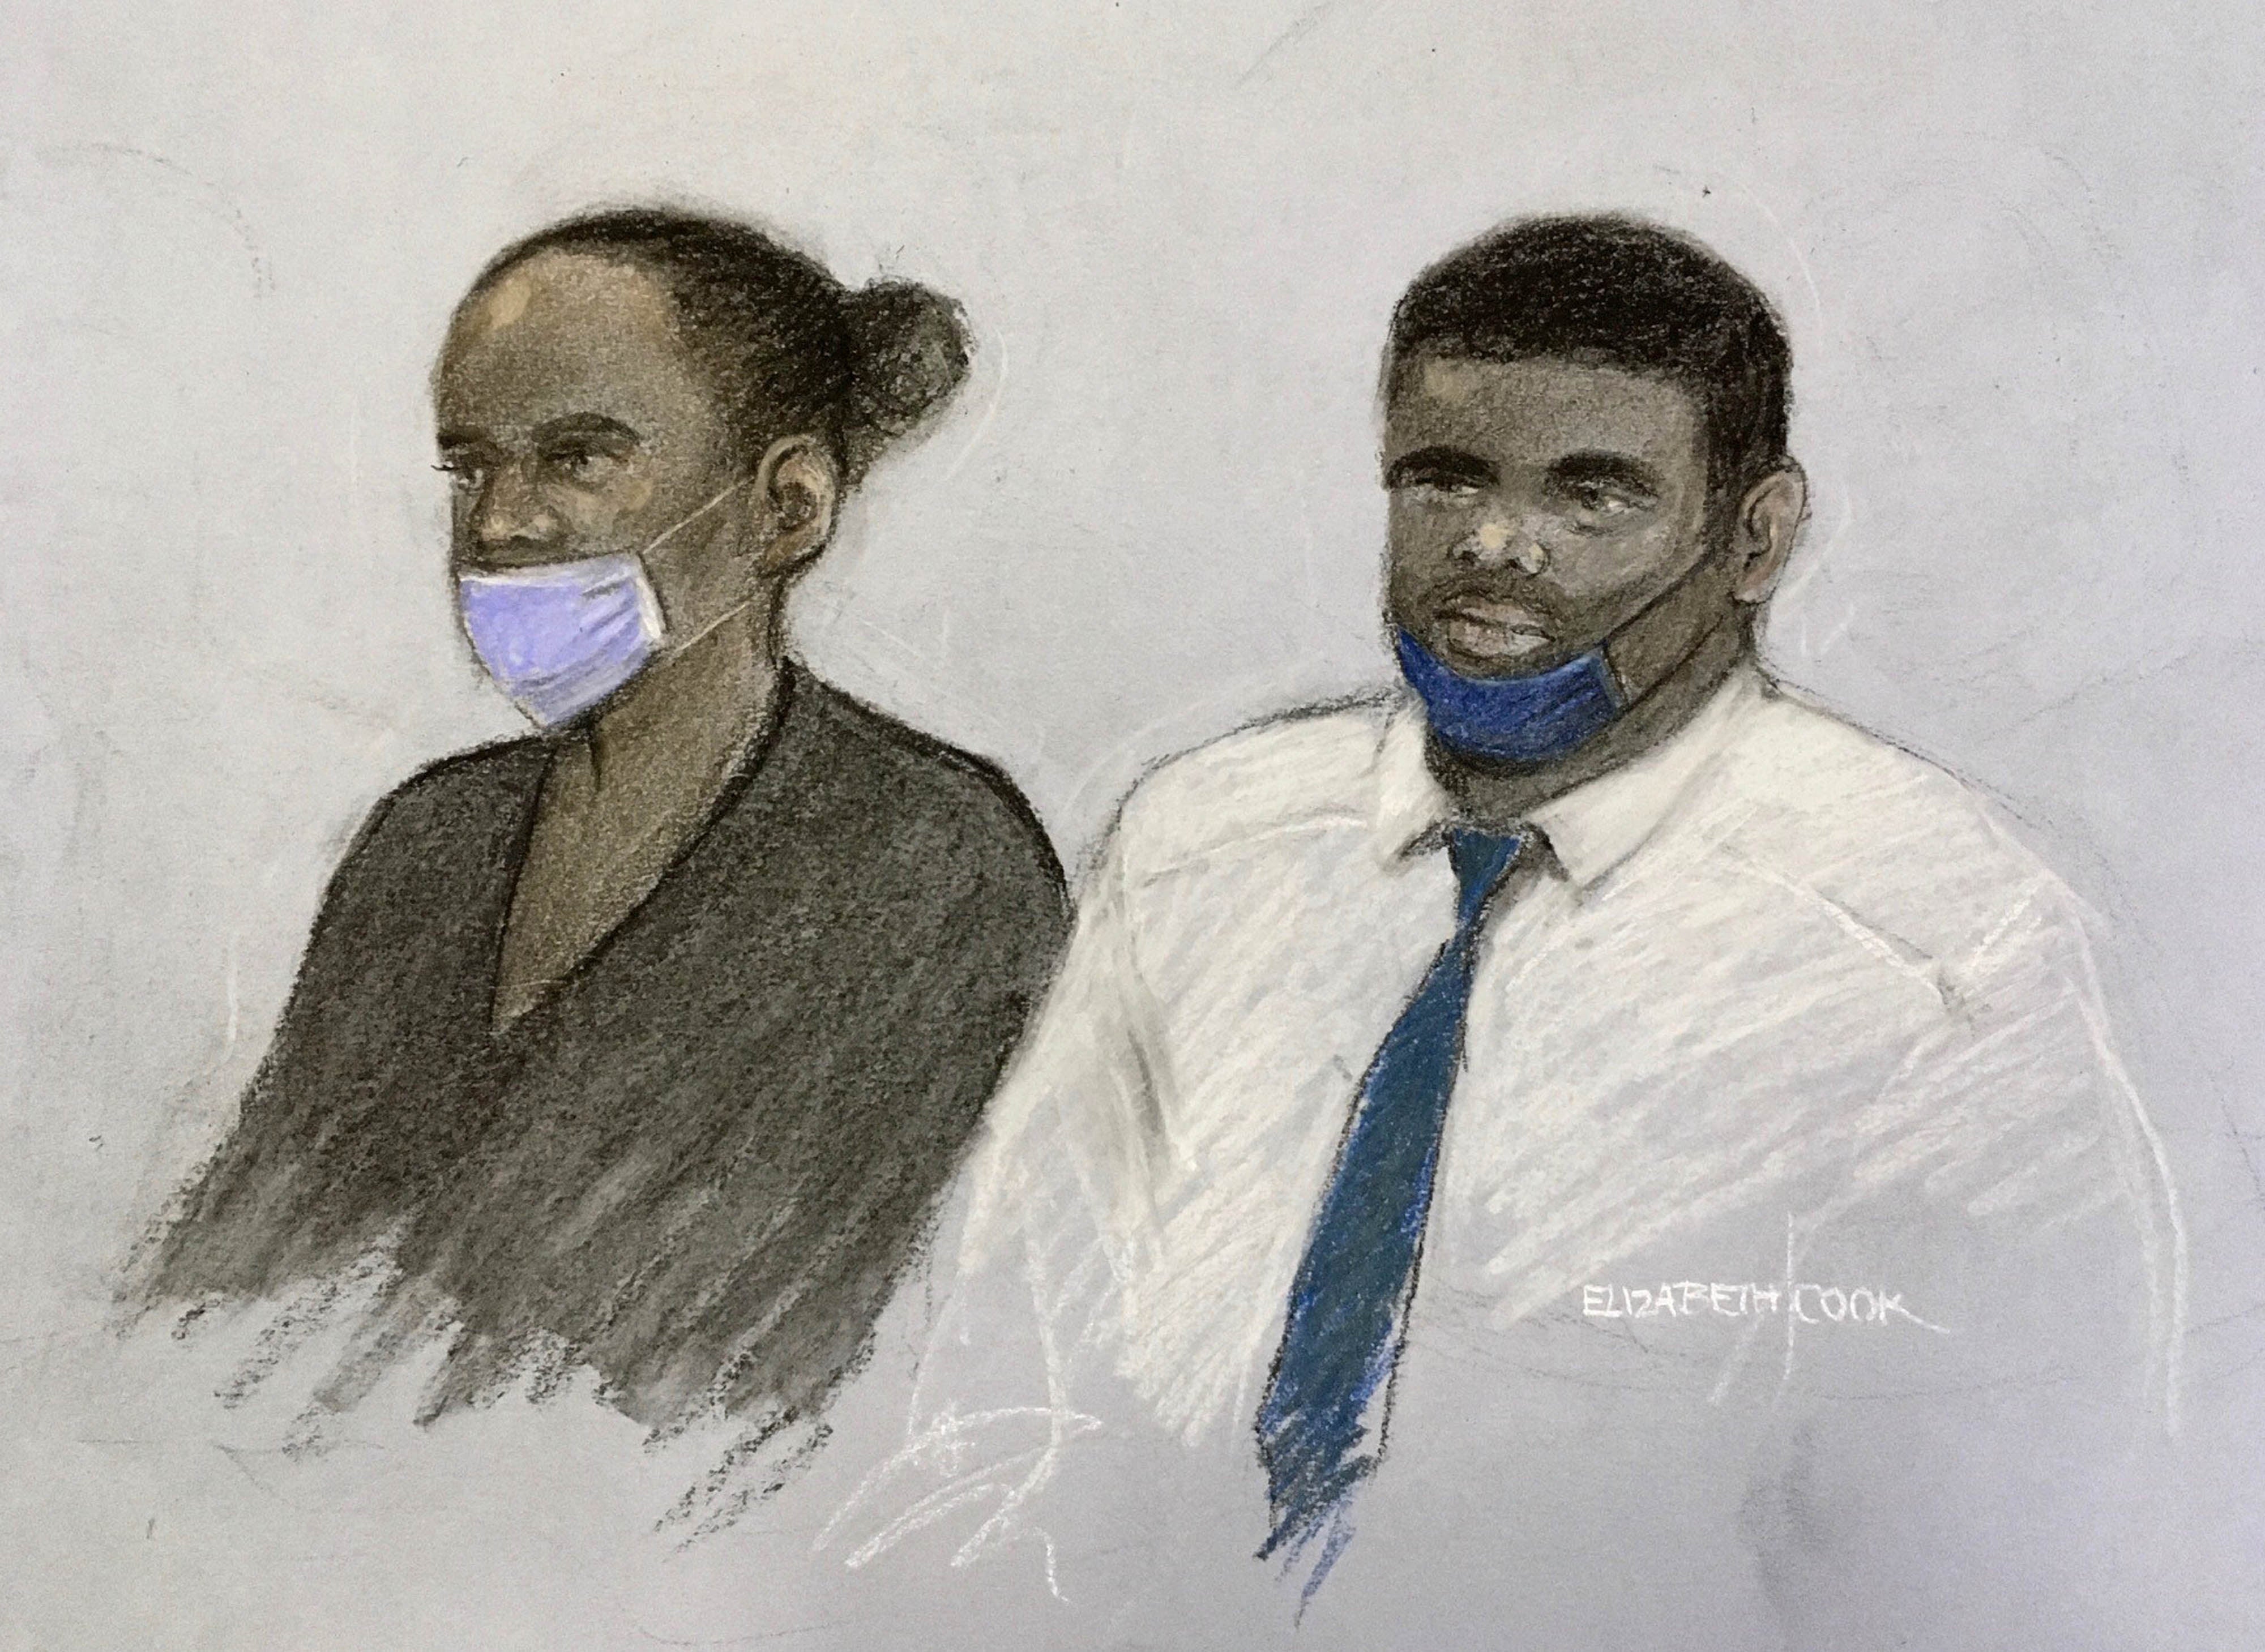 Court artist sketch by Elizabeth Cook of Phylesia Shirley and Kemar Brown appearing at the Old Bailey in London charged with murder and causing or allowing the death of a child